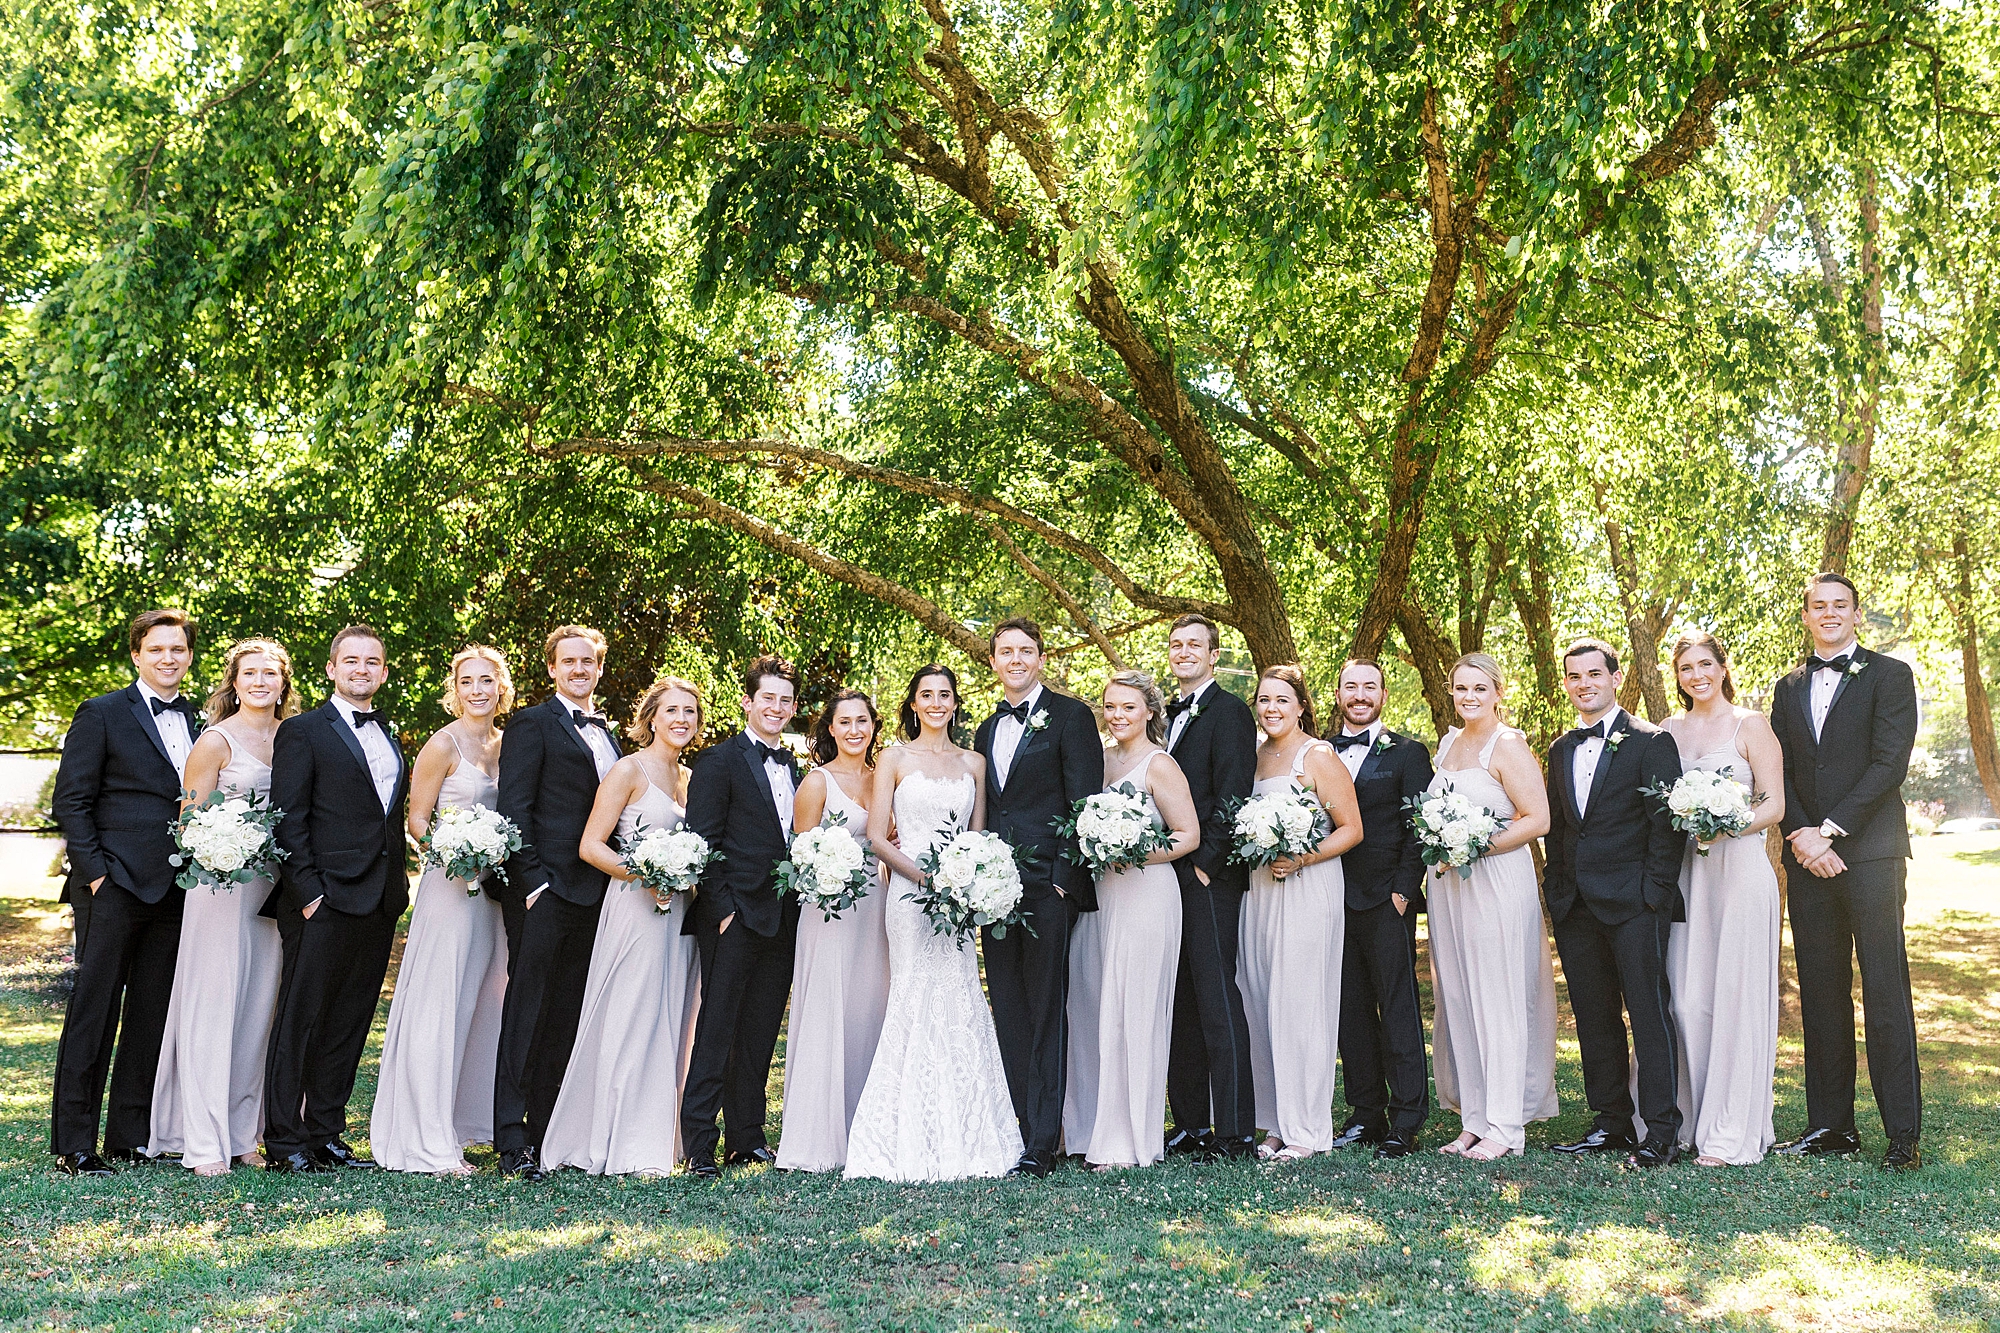 newlyweds stand with wedding party in classic tuxes and pink gowns